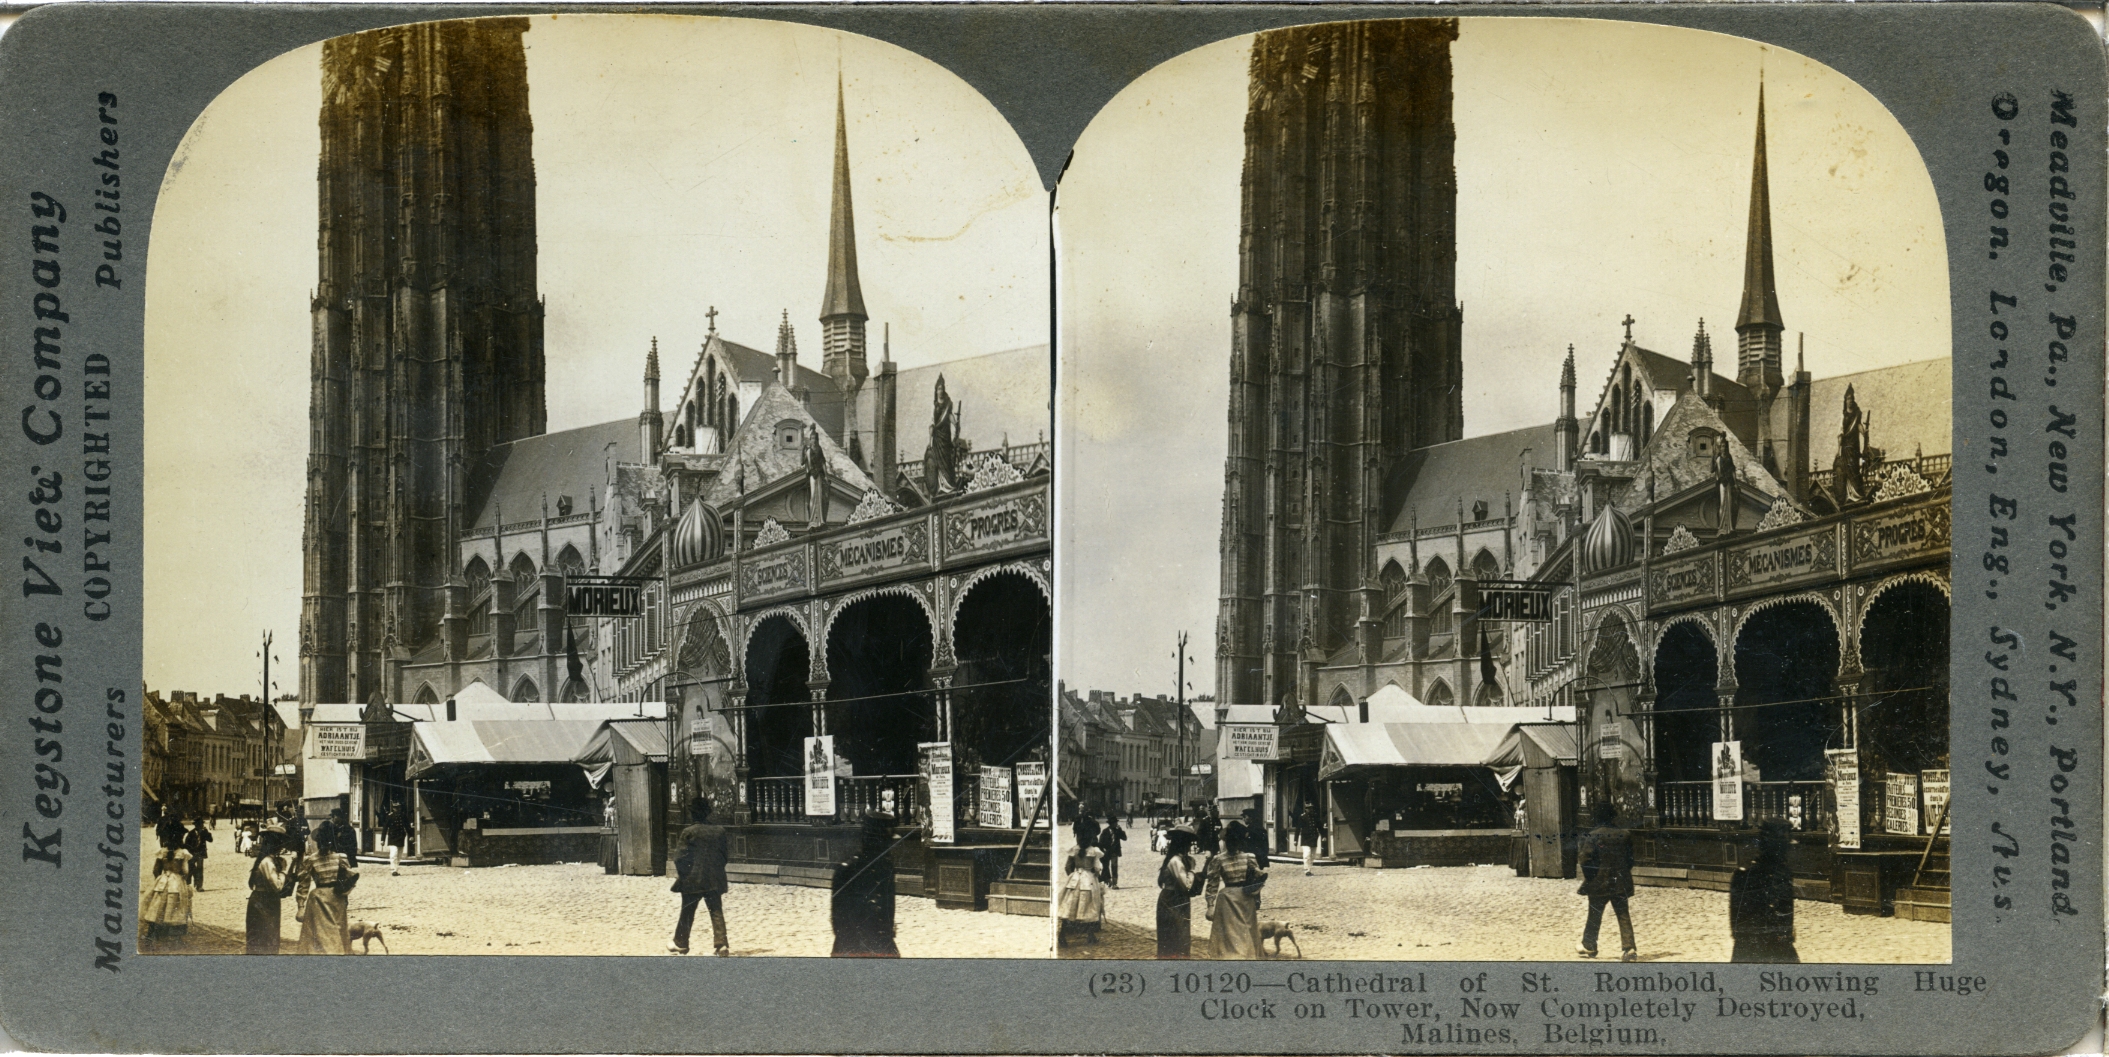 Cathedral of St. Rombold, Showing Huge Clock Tower, Now Completely Destroyed, Malines, Belgium